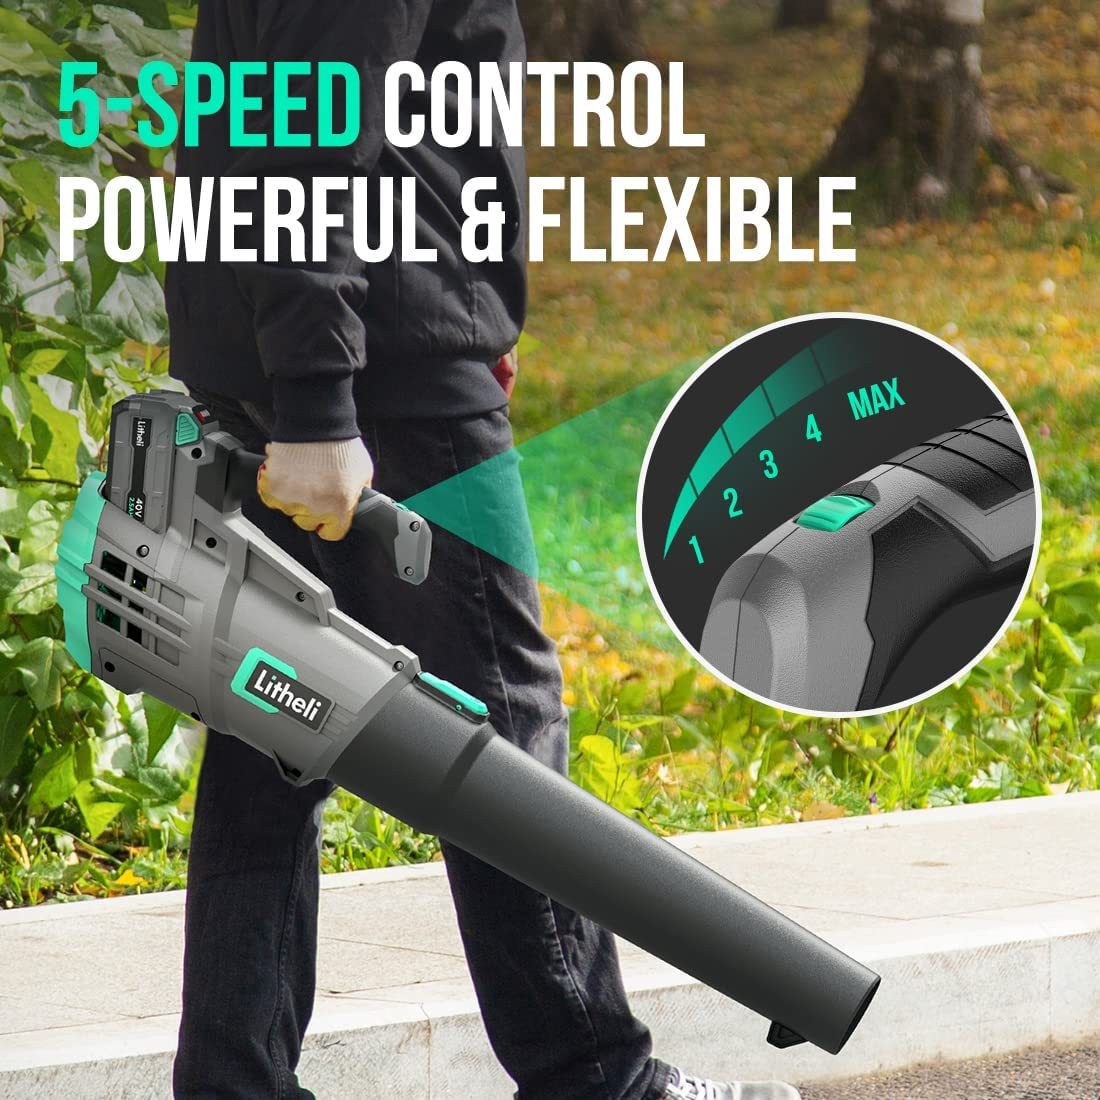 Dextra Cordless Leaf Blower, 20V Battery Powered Leaf Blower with